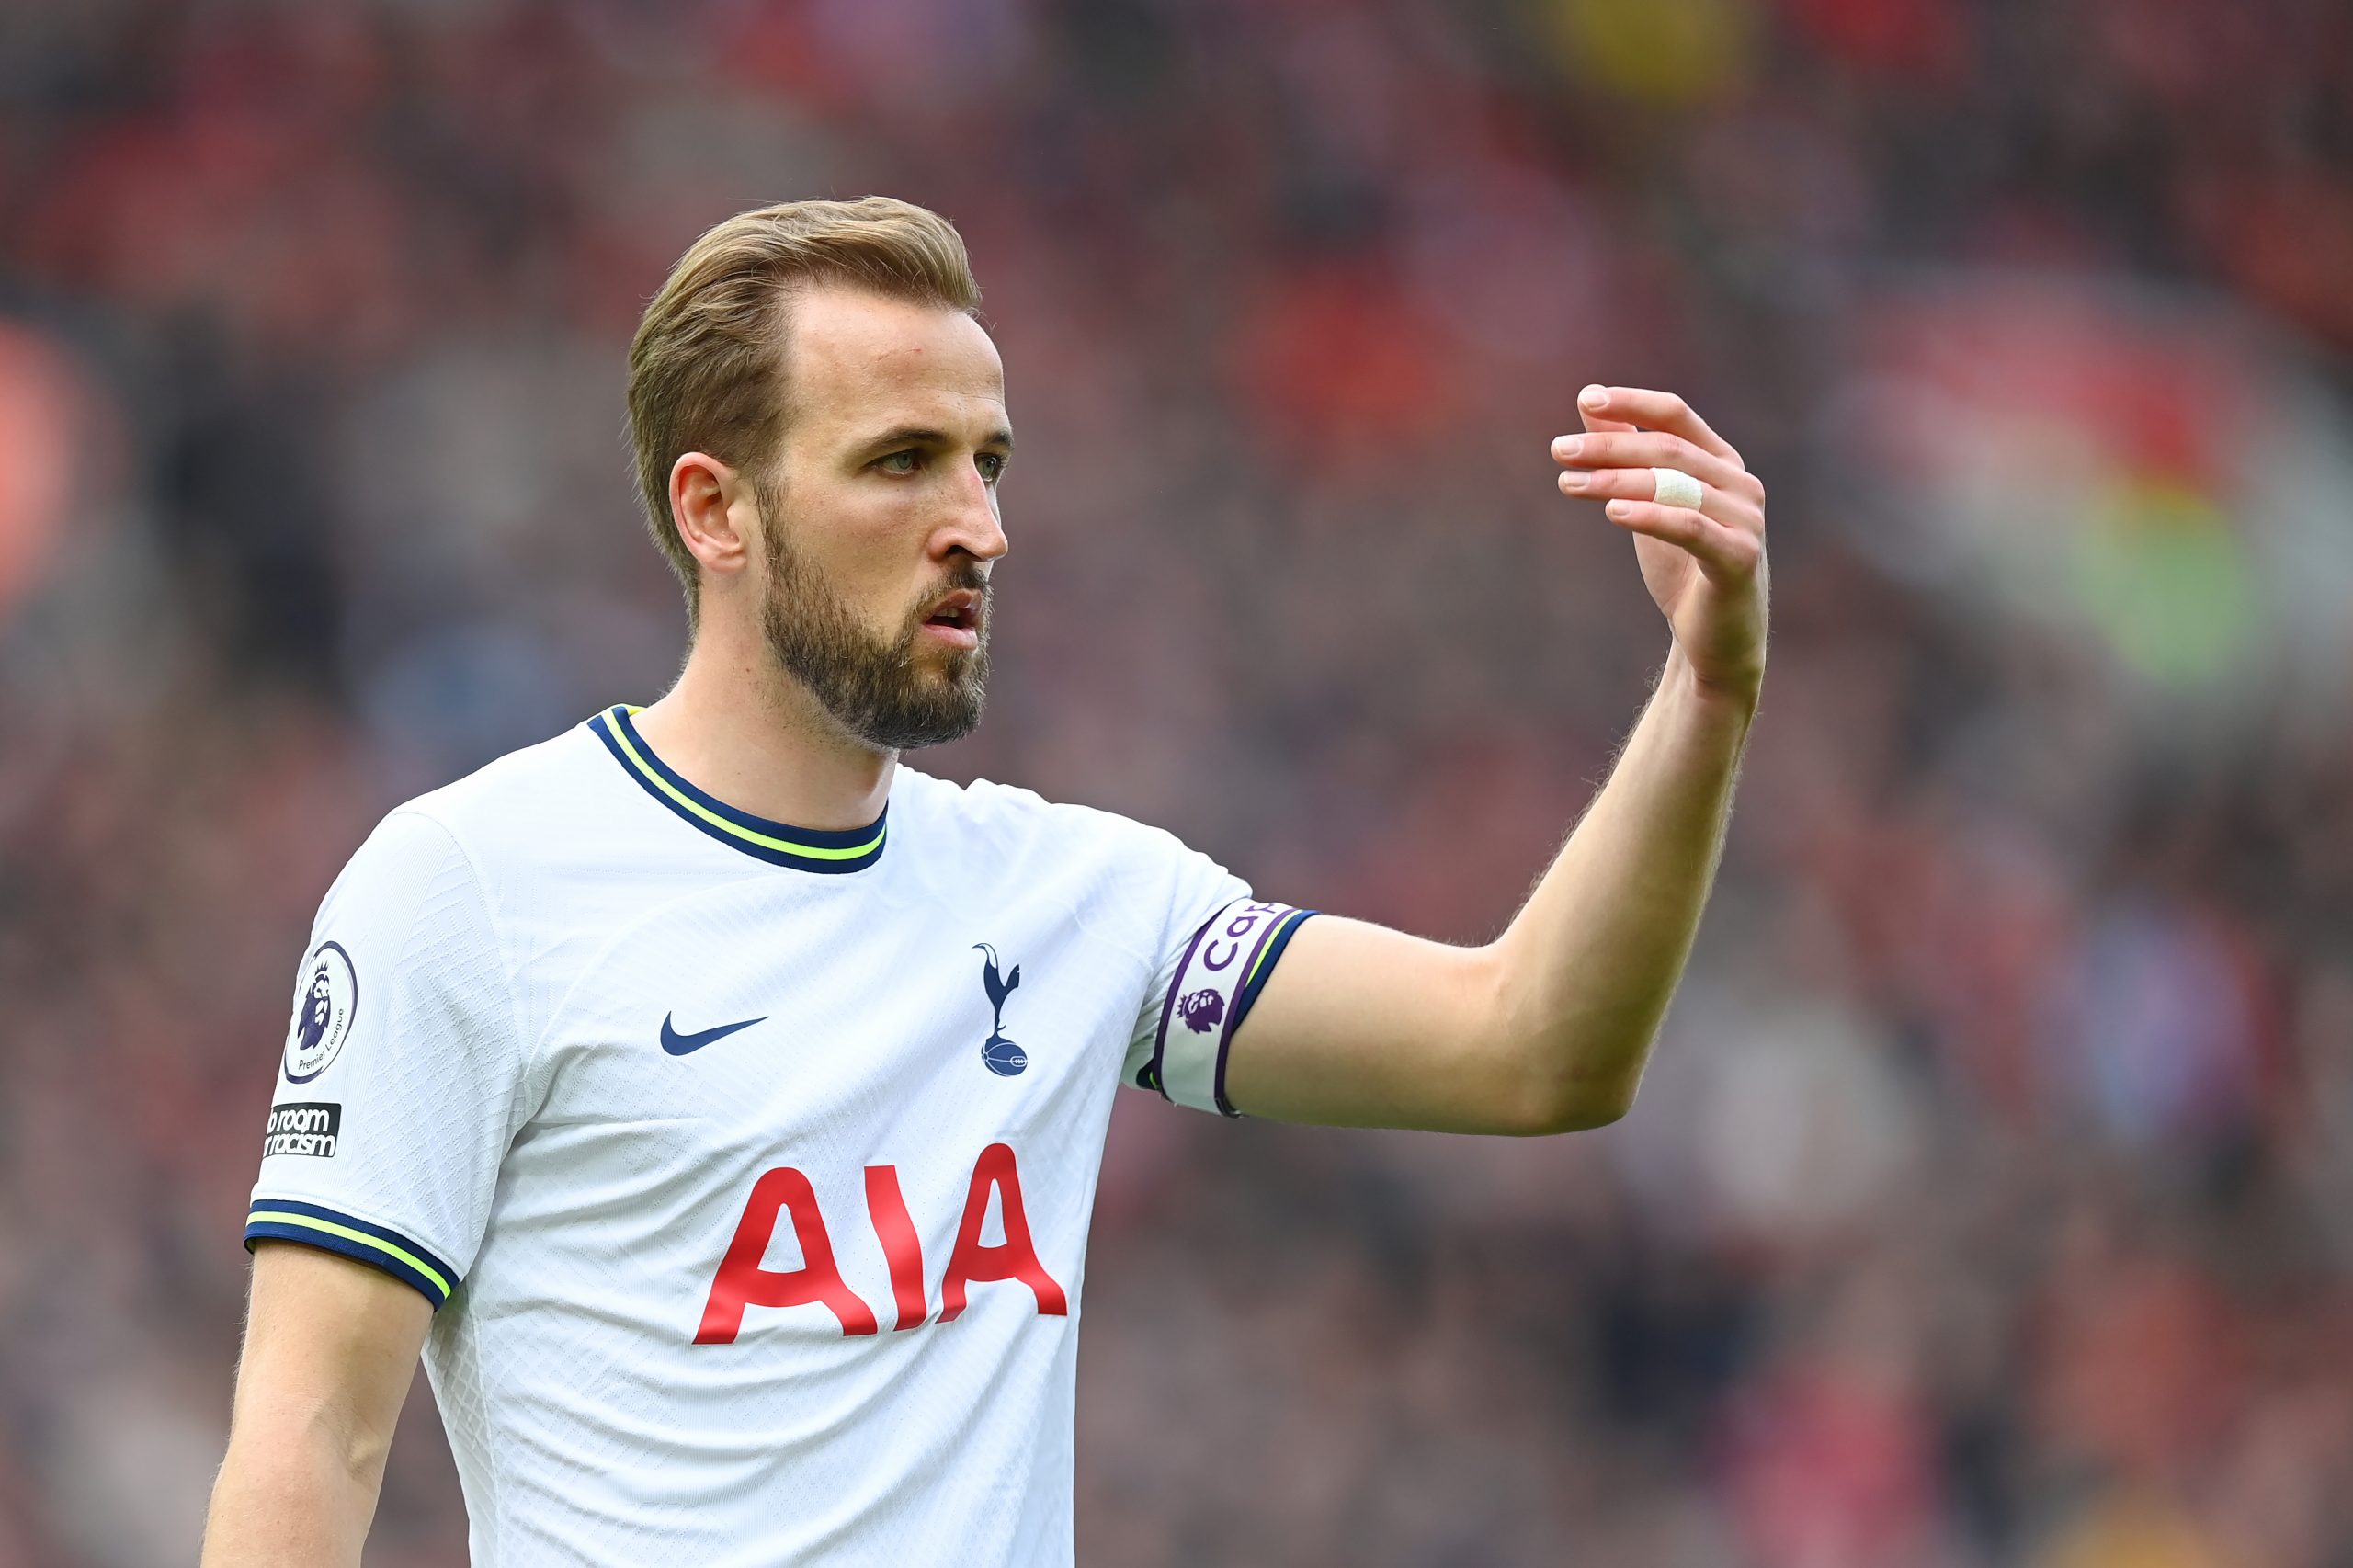 Manchester United aim to act quickly in their bid to sign Harry Kane